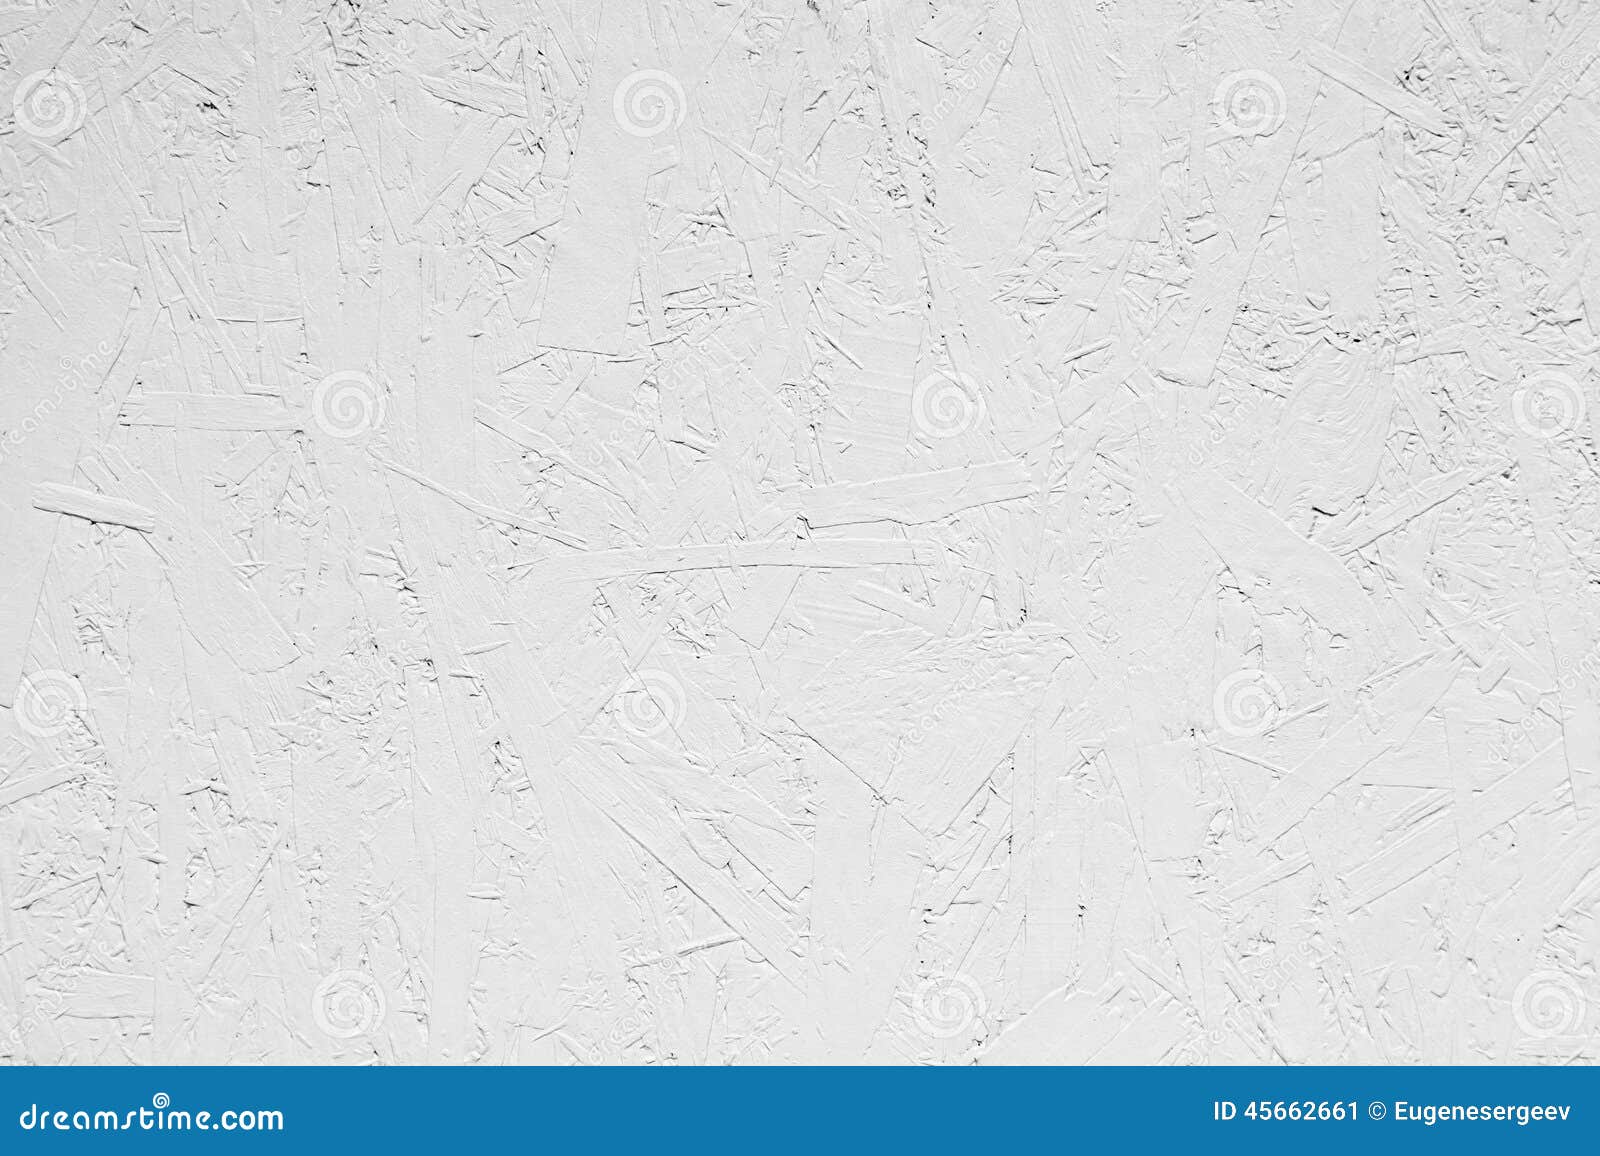 White Grungy Painted Wooden Plywood Wall Stock Image Image Of